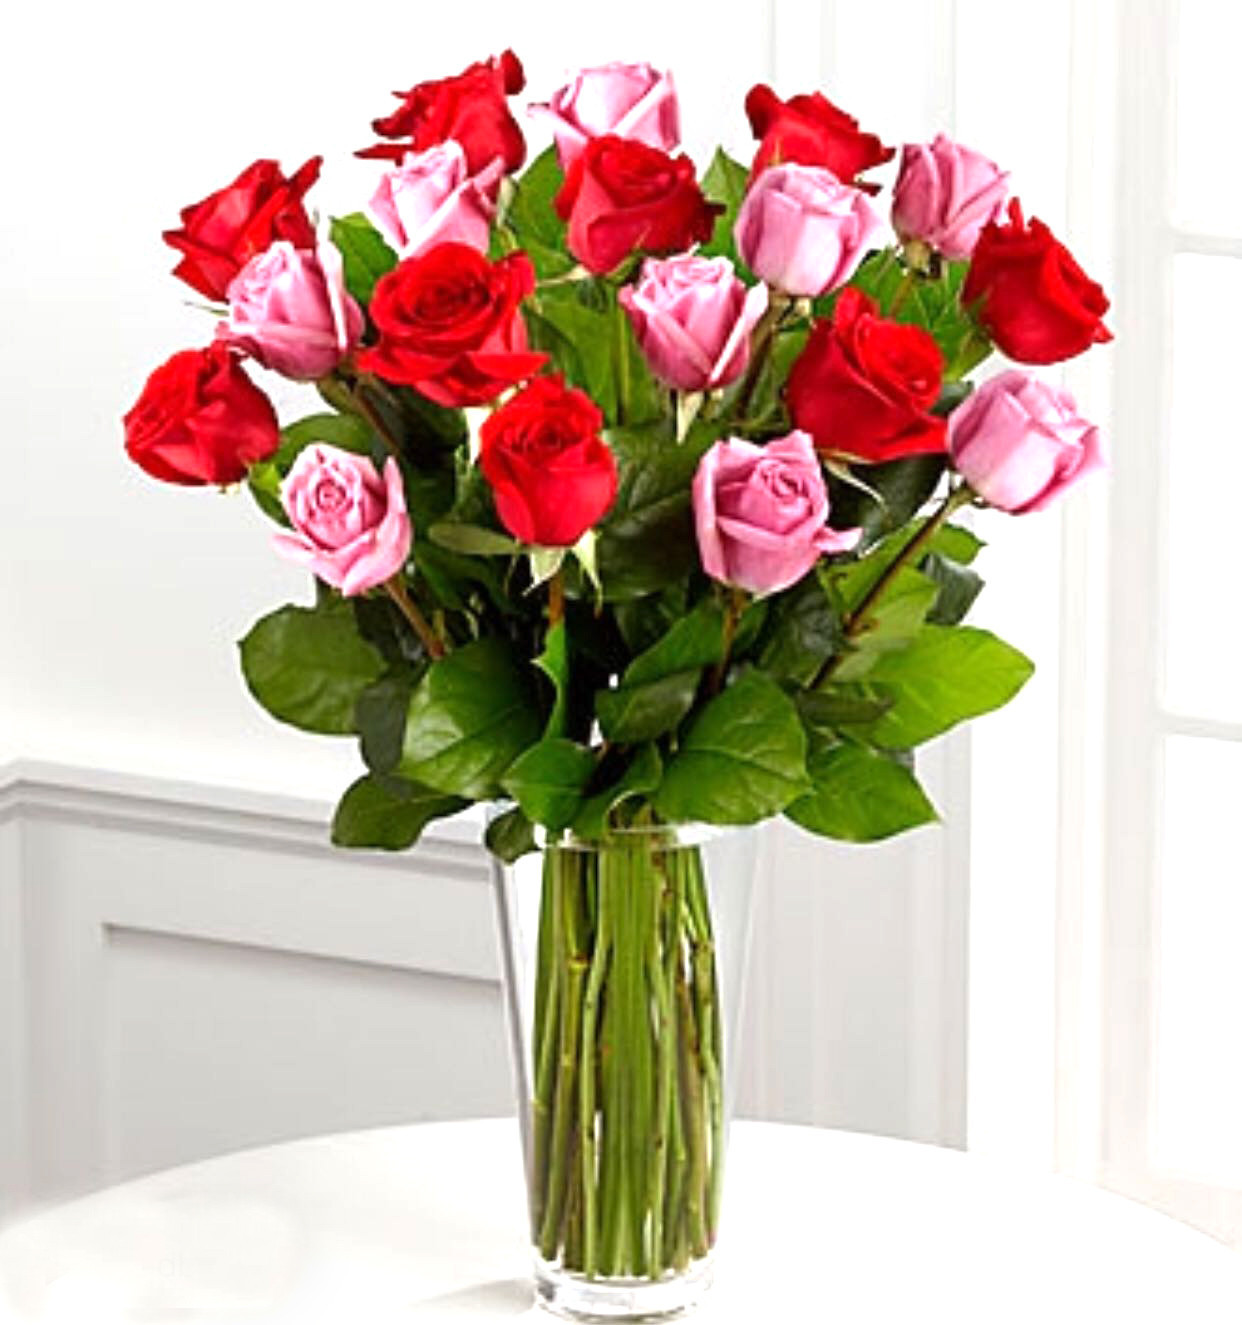 12 Stunning Fuschia Glass Vase 2024 free download fuschia glass vase of red and white vase gallery red and white wedding decor elegant glass throughout red and white vase pics pink roses with wax flowerh vases in a vase floweri 0d